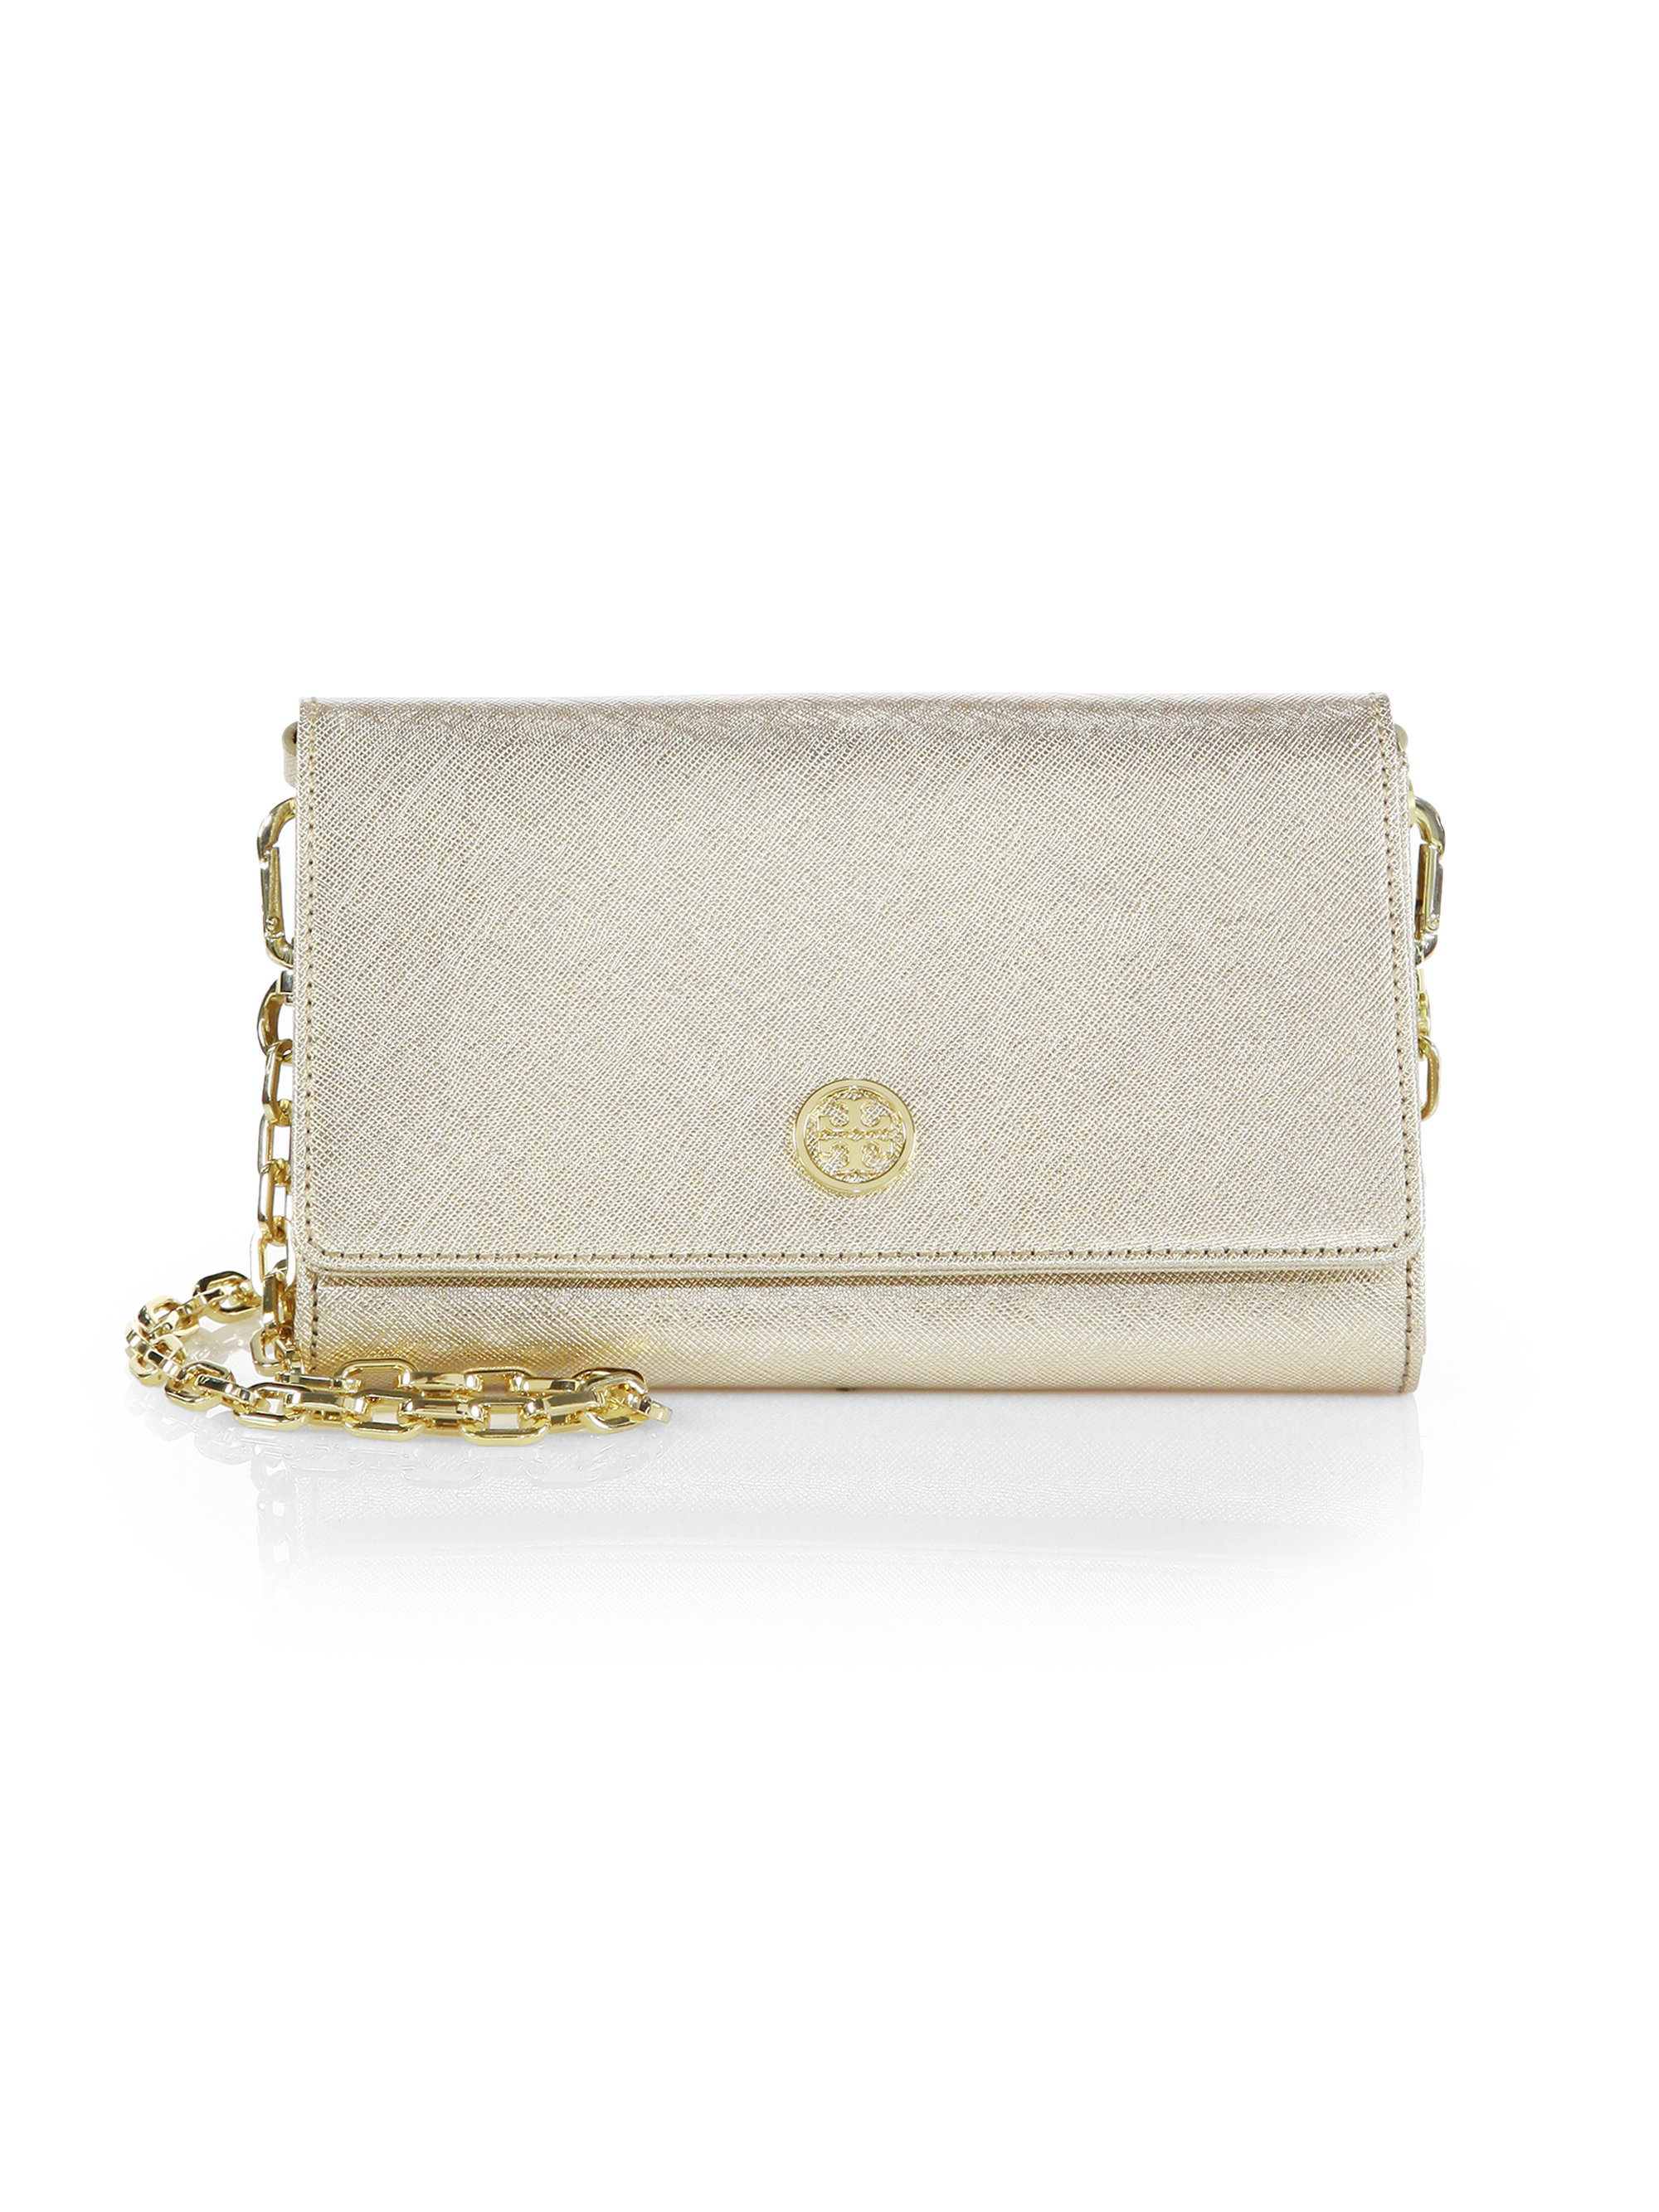 Lyst - Tory burch Robinson Metallic Saffiano Leather Chain Wallet in ...